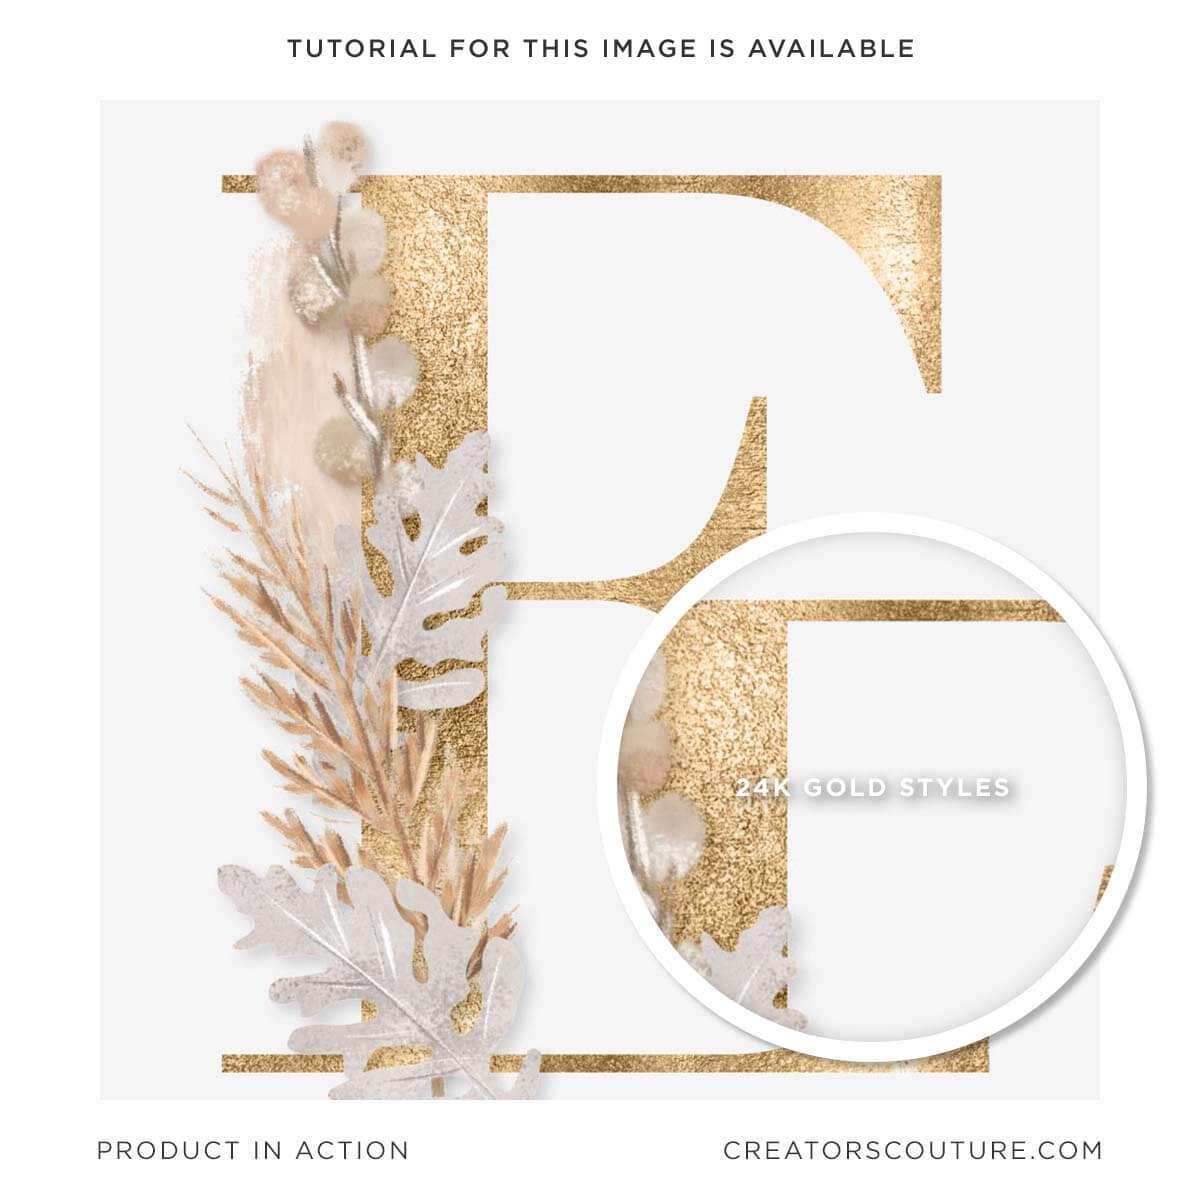 monogram E on white background with illustrations, metallic foil textures applied in copper color